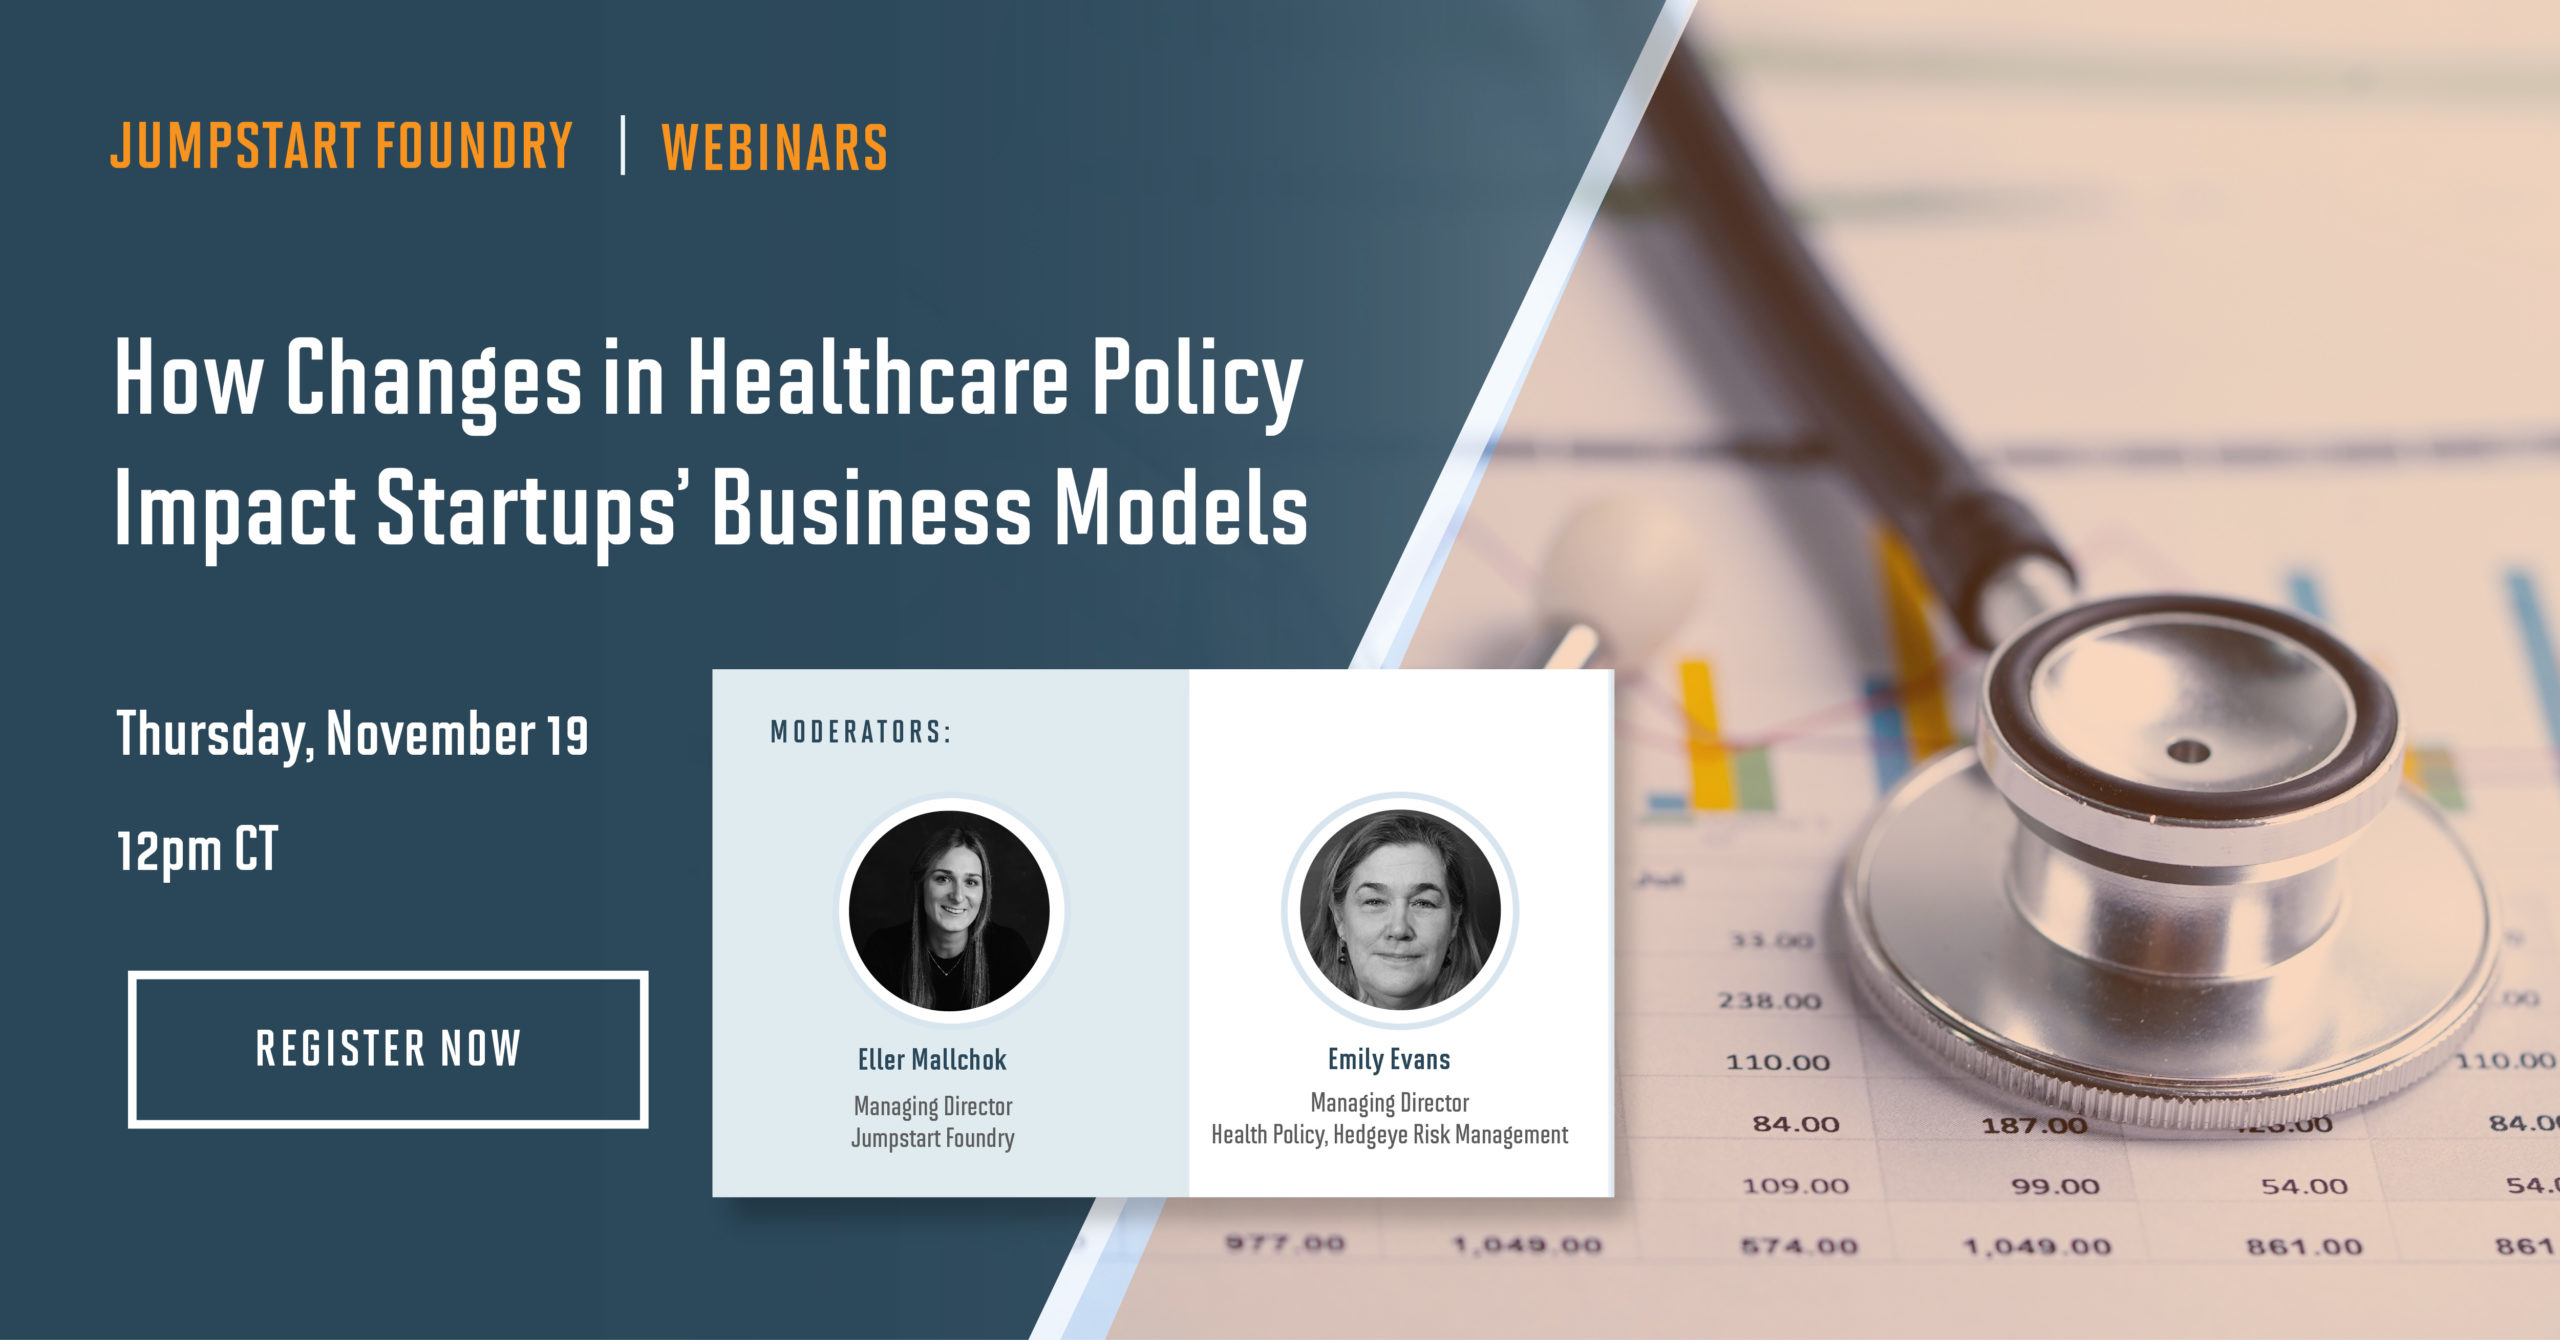 How Changes in Healthcare Policies Impact Startups' Business Models